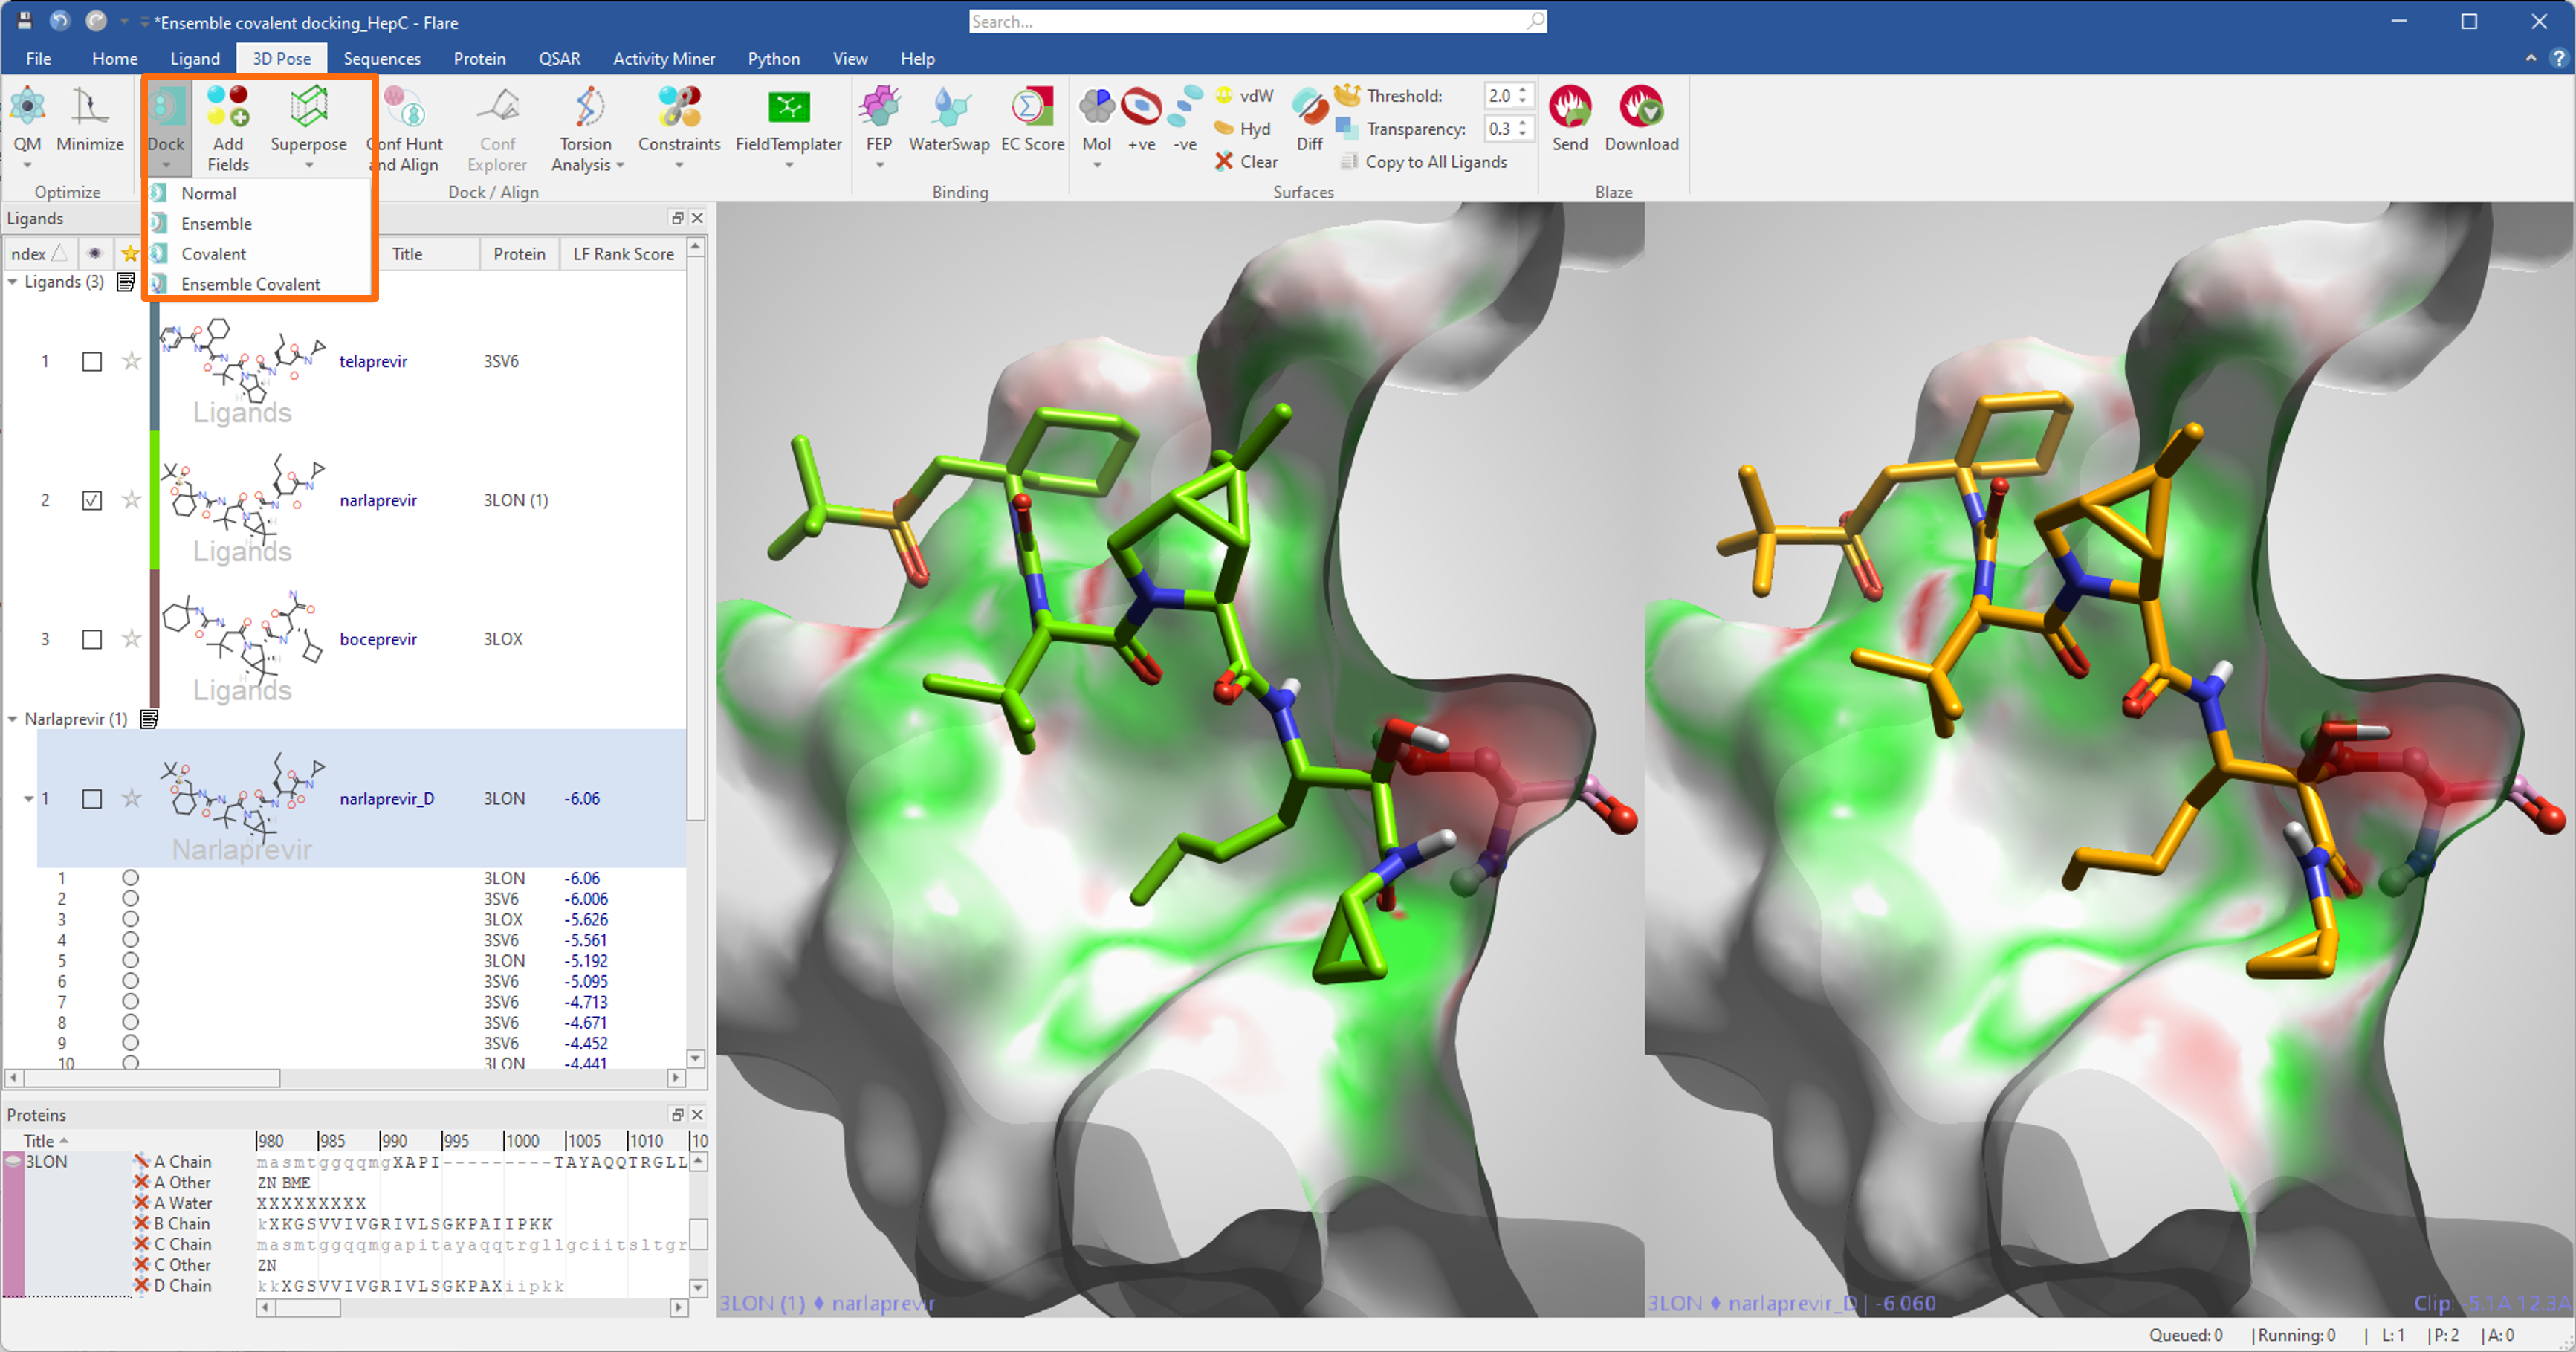 Results on an ensemble covalent docking experiment on covalent inhibitors of the HCV NS3/4A protease complex